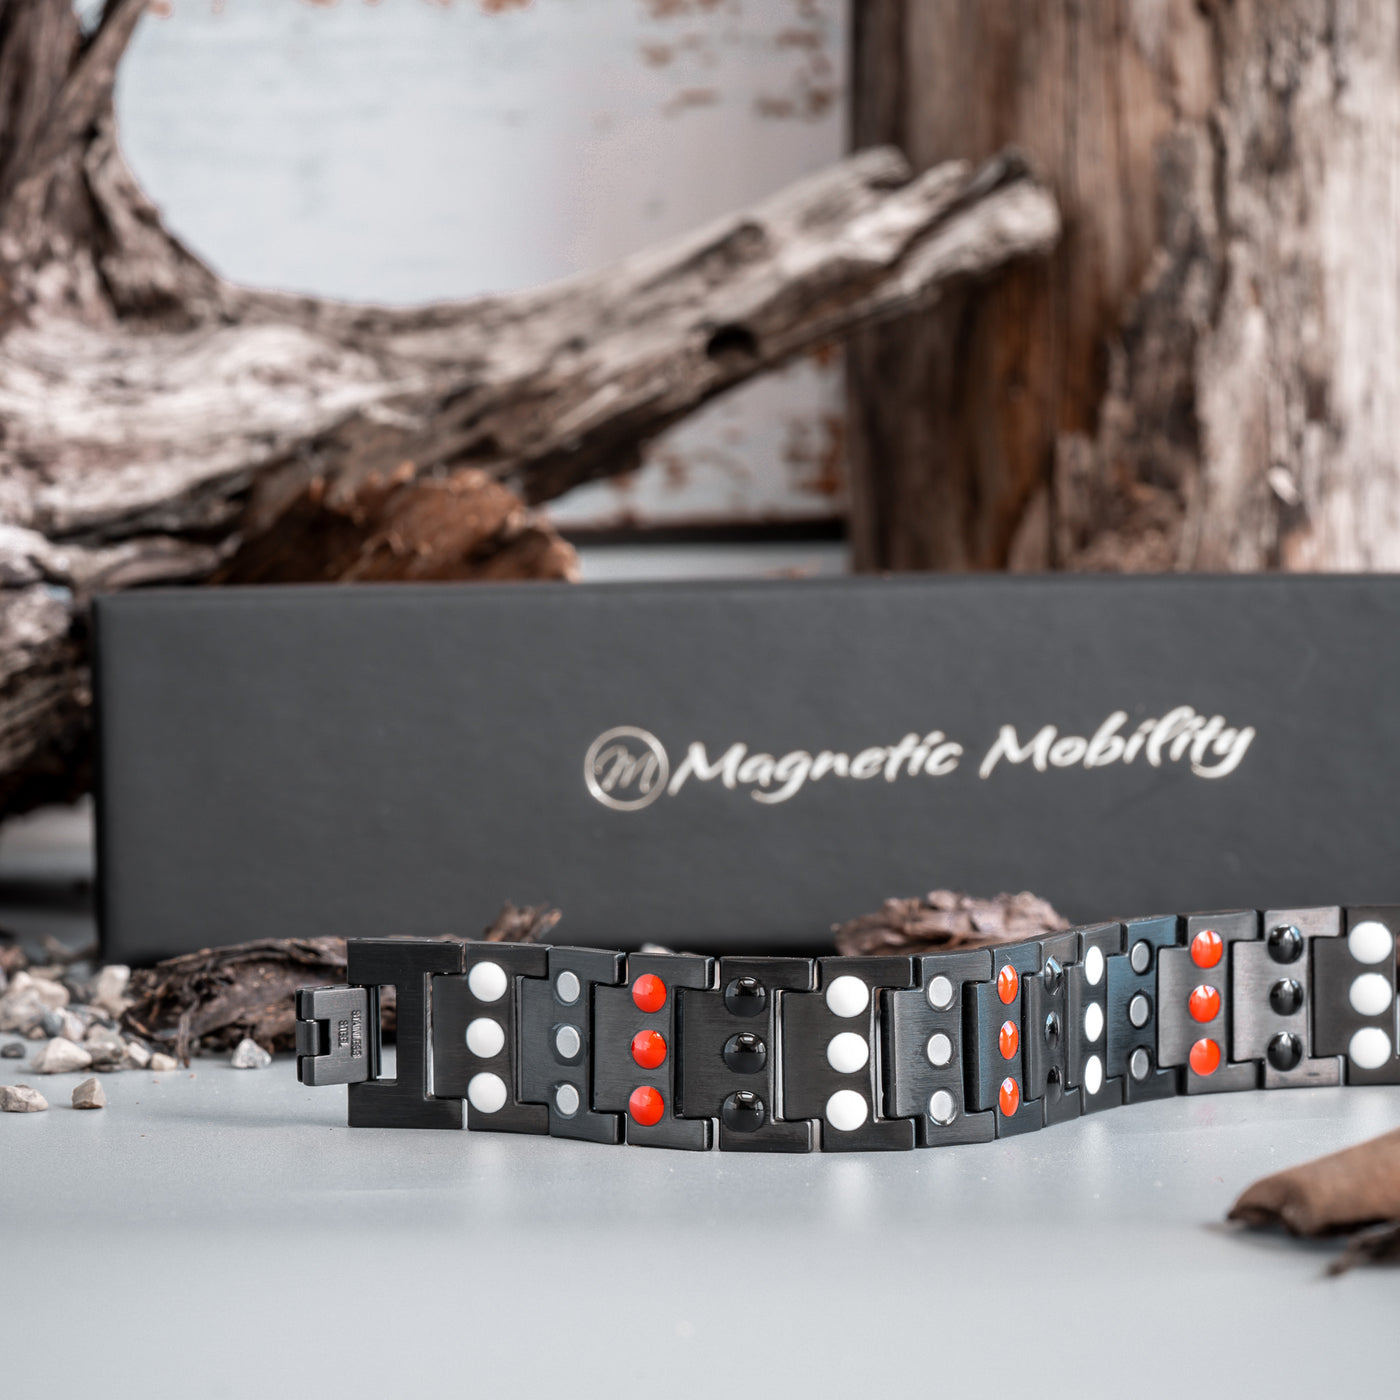 Detail of the three rows of 4in1 elements in the Birch Night Men's Magnetic Bracelet, showcasing quality and design precision for maximum support.